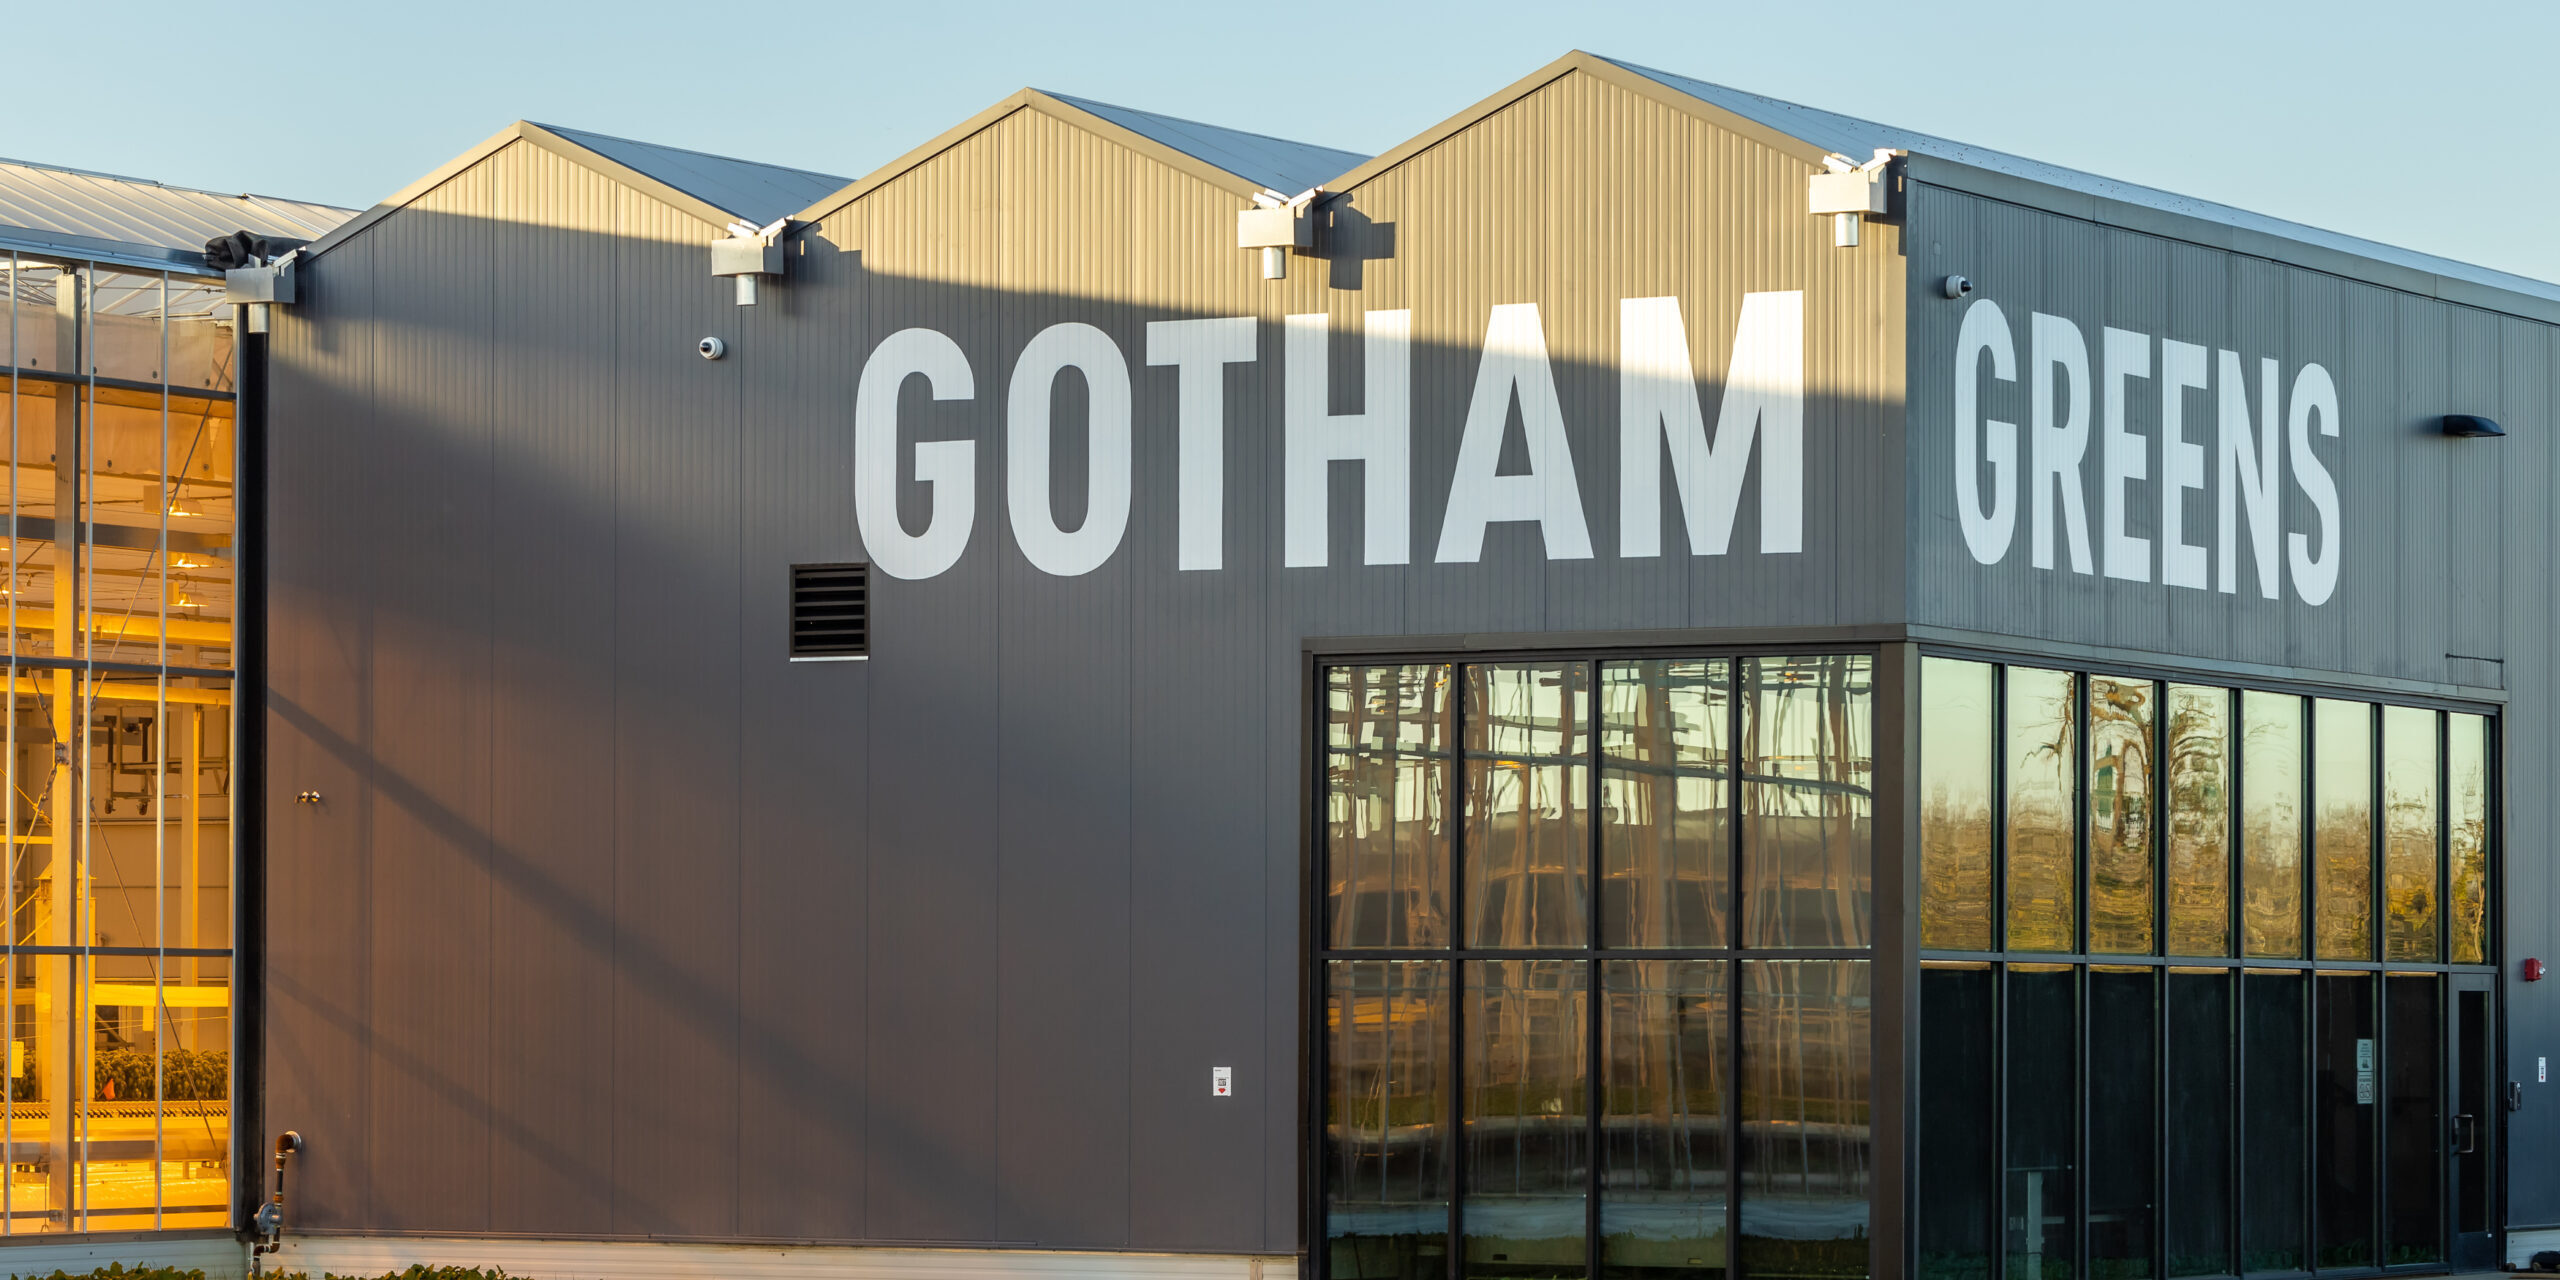 Gotham Greens opens New England greenhouse - Produce Processing